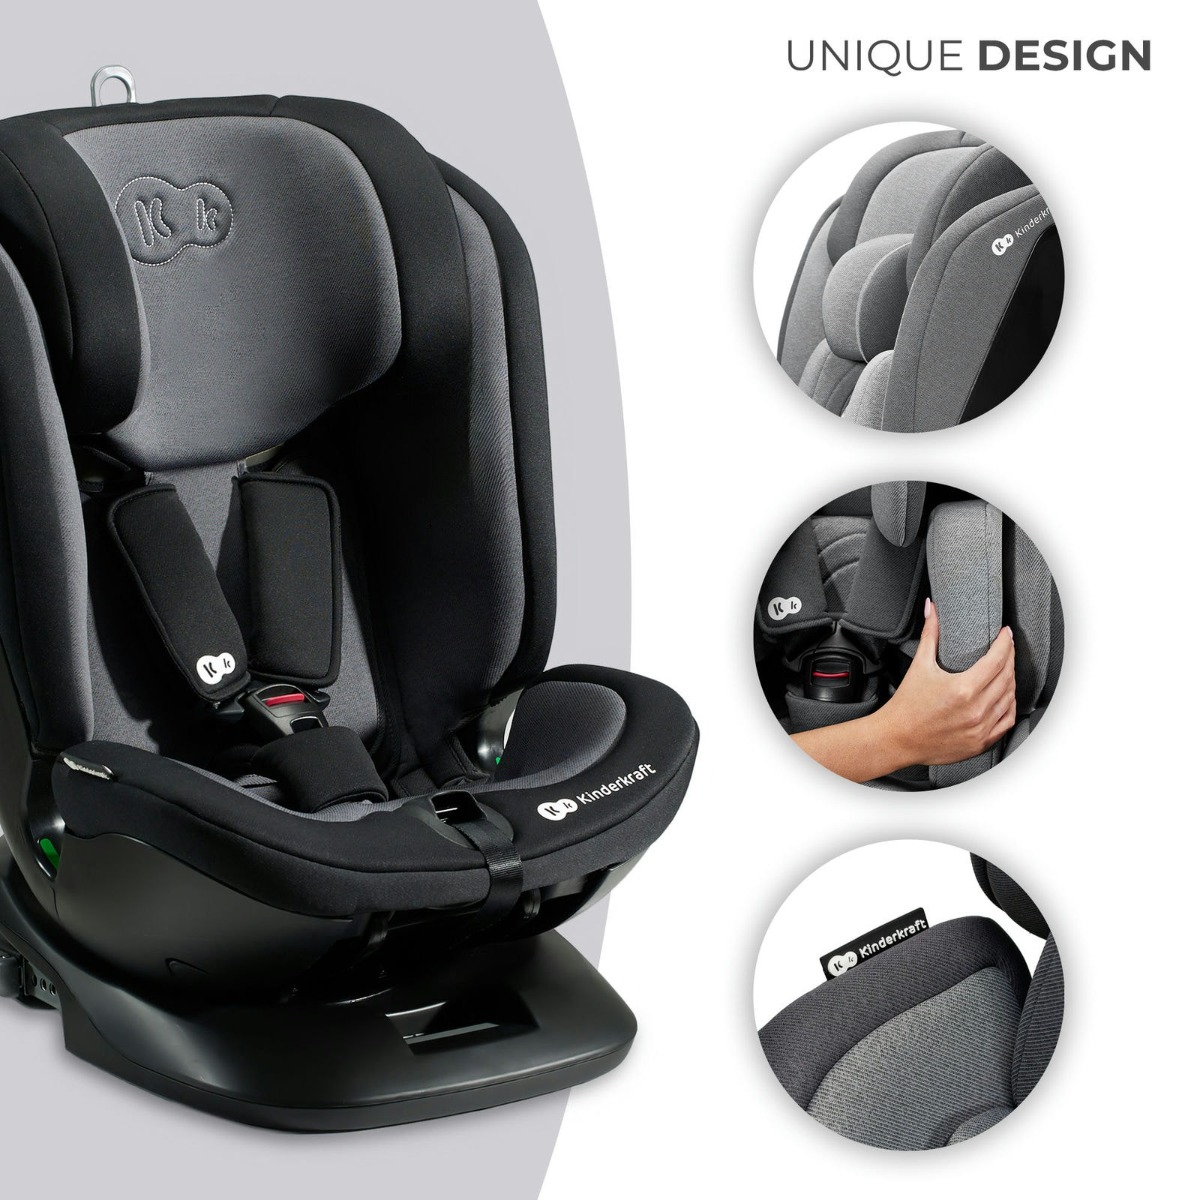 Car seat XPEDITION 2 i-Size black